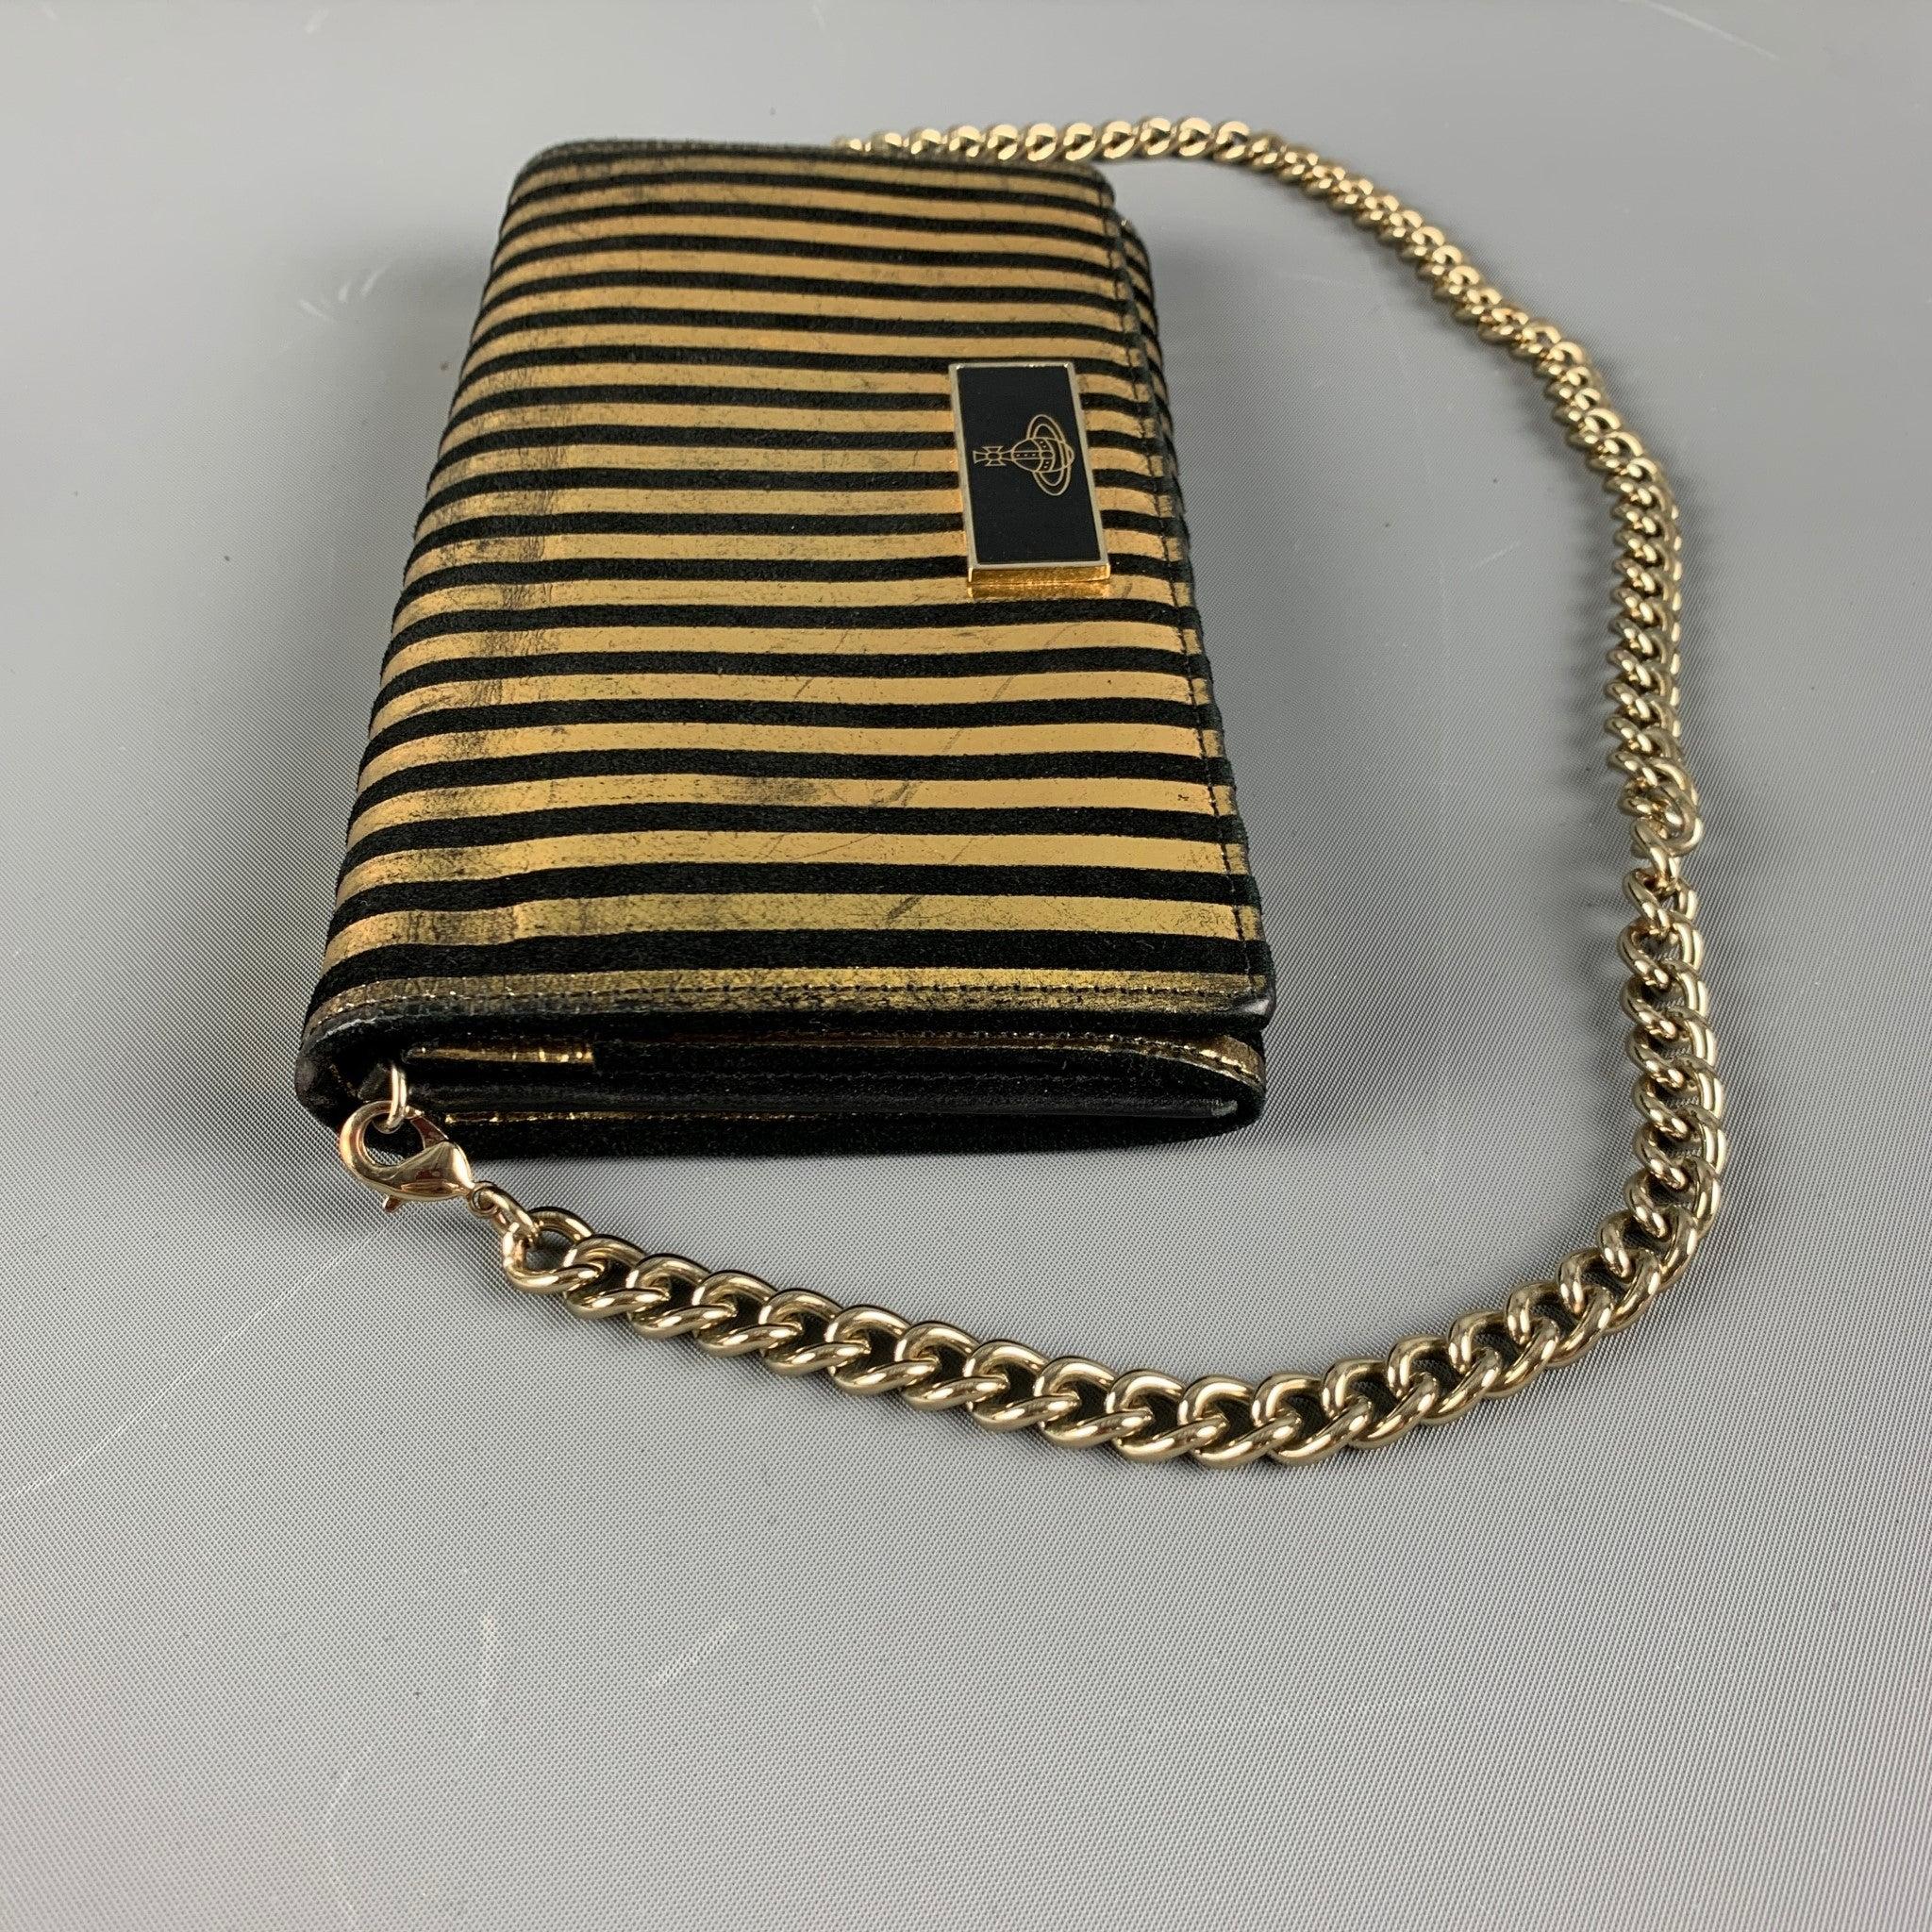 VIVIENNE WESTWOOD wallet handbag comes in a black and gold striped leather featuring inner slots, detachable gold tone chain strap, and a zipper pocket. Made in Italy.Very Good Pre-Owned Condition. Moderate color fading. 

Measurements: 
  Length: 8